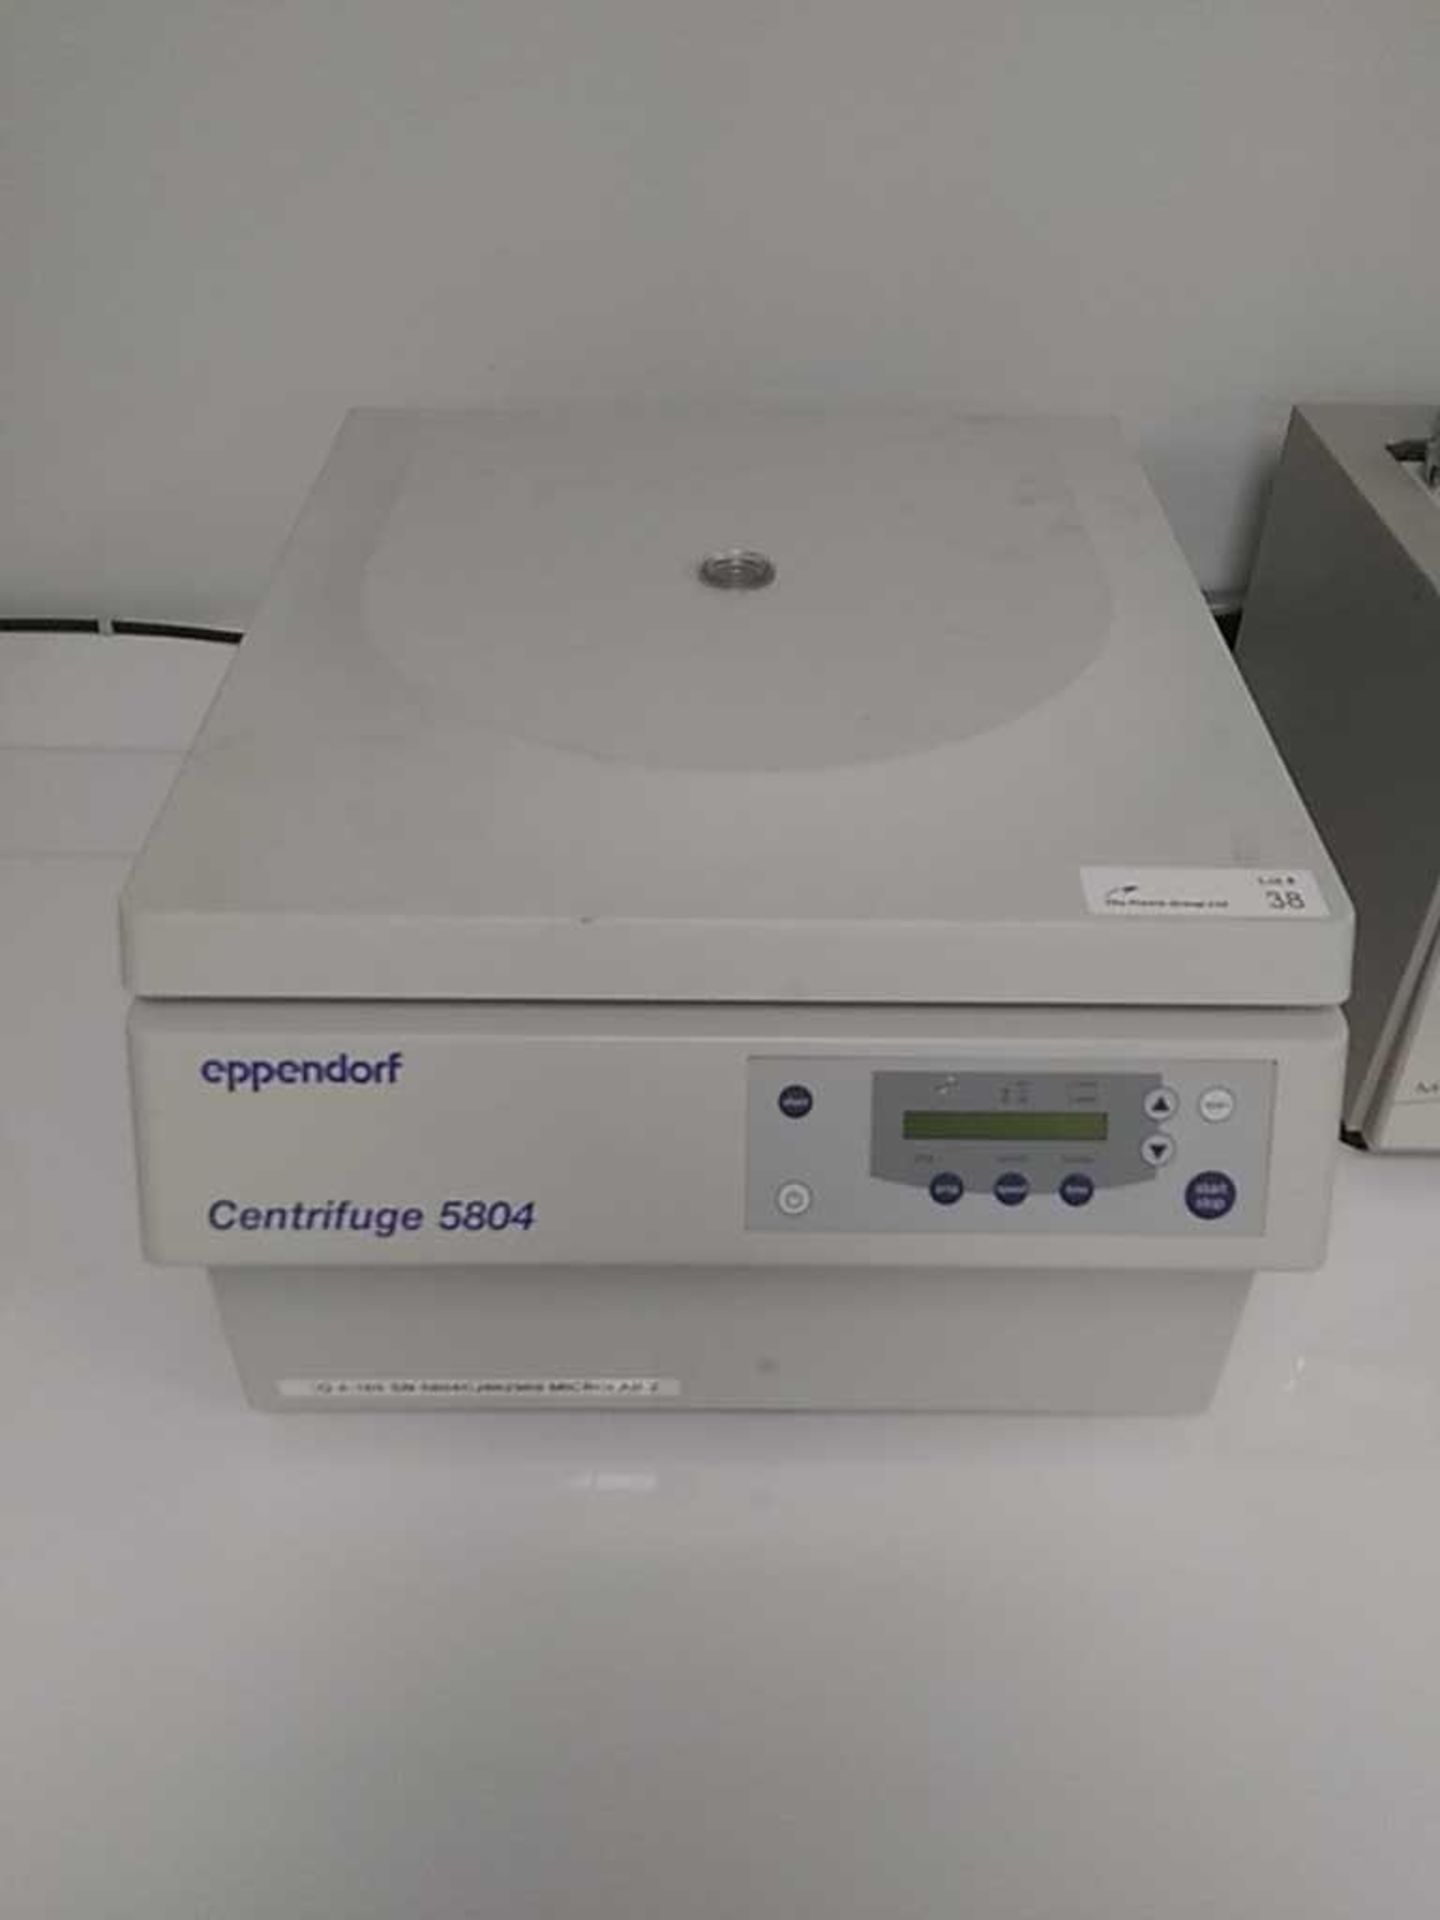 Eppendorf 5804 Benchtop Centrifuge With Rotor - Image 6 of 7